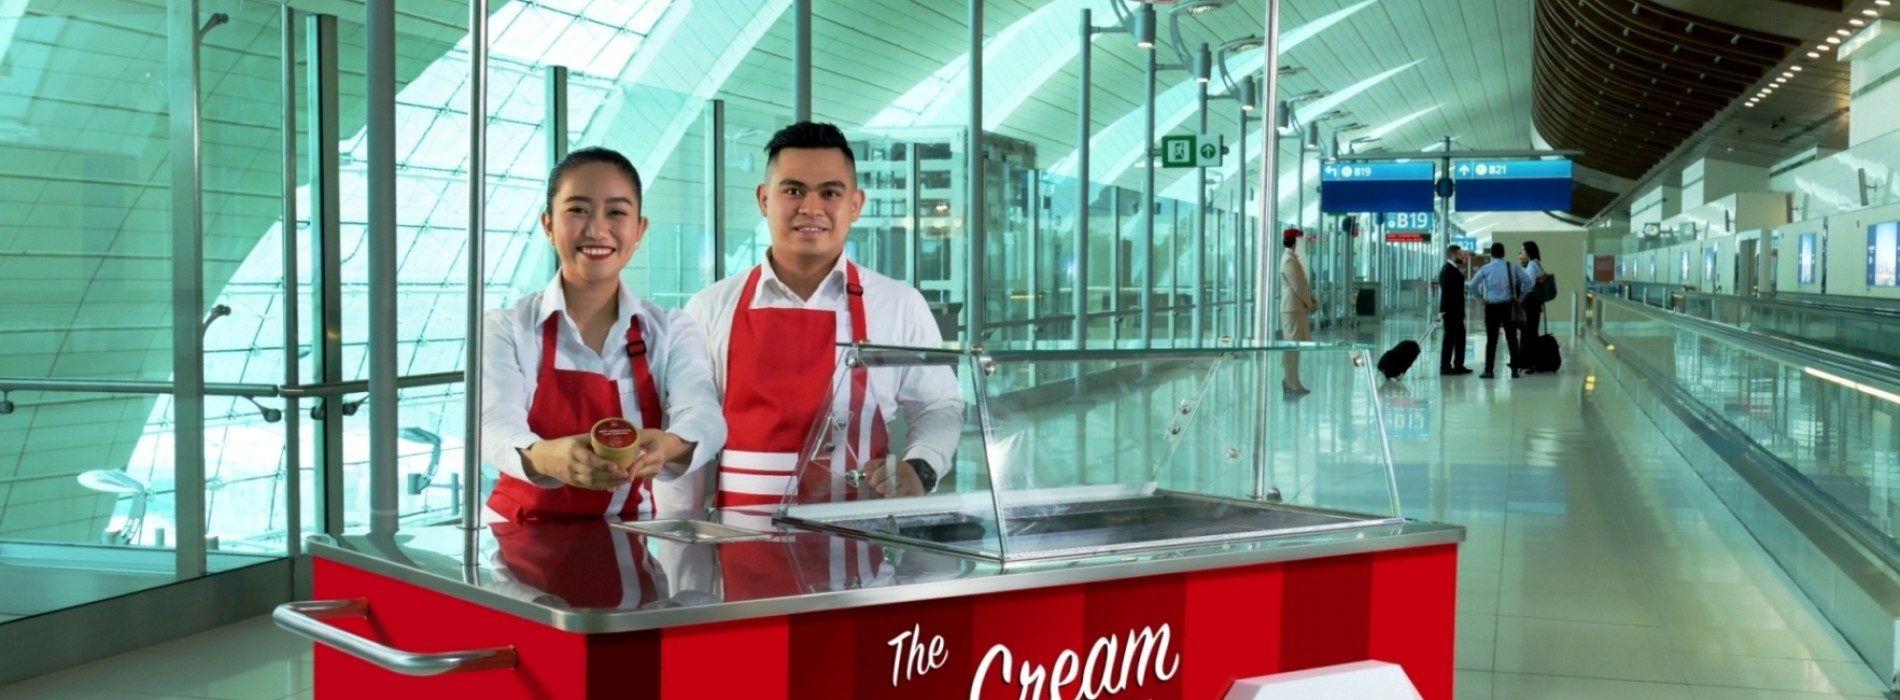 Summer just got cooler with Emirates’ complimentary ice cream service